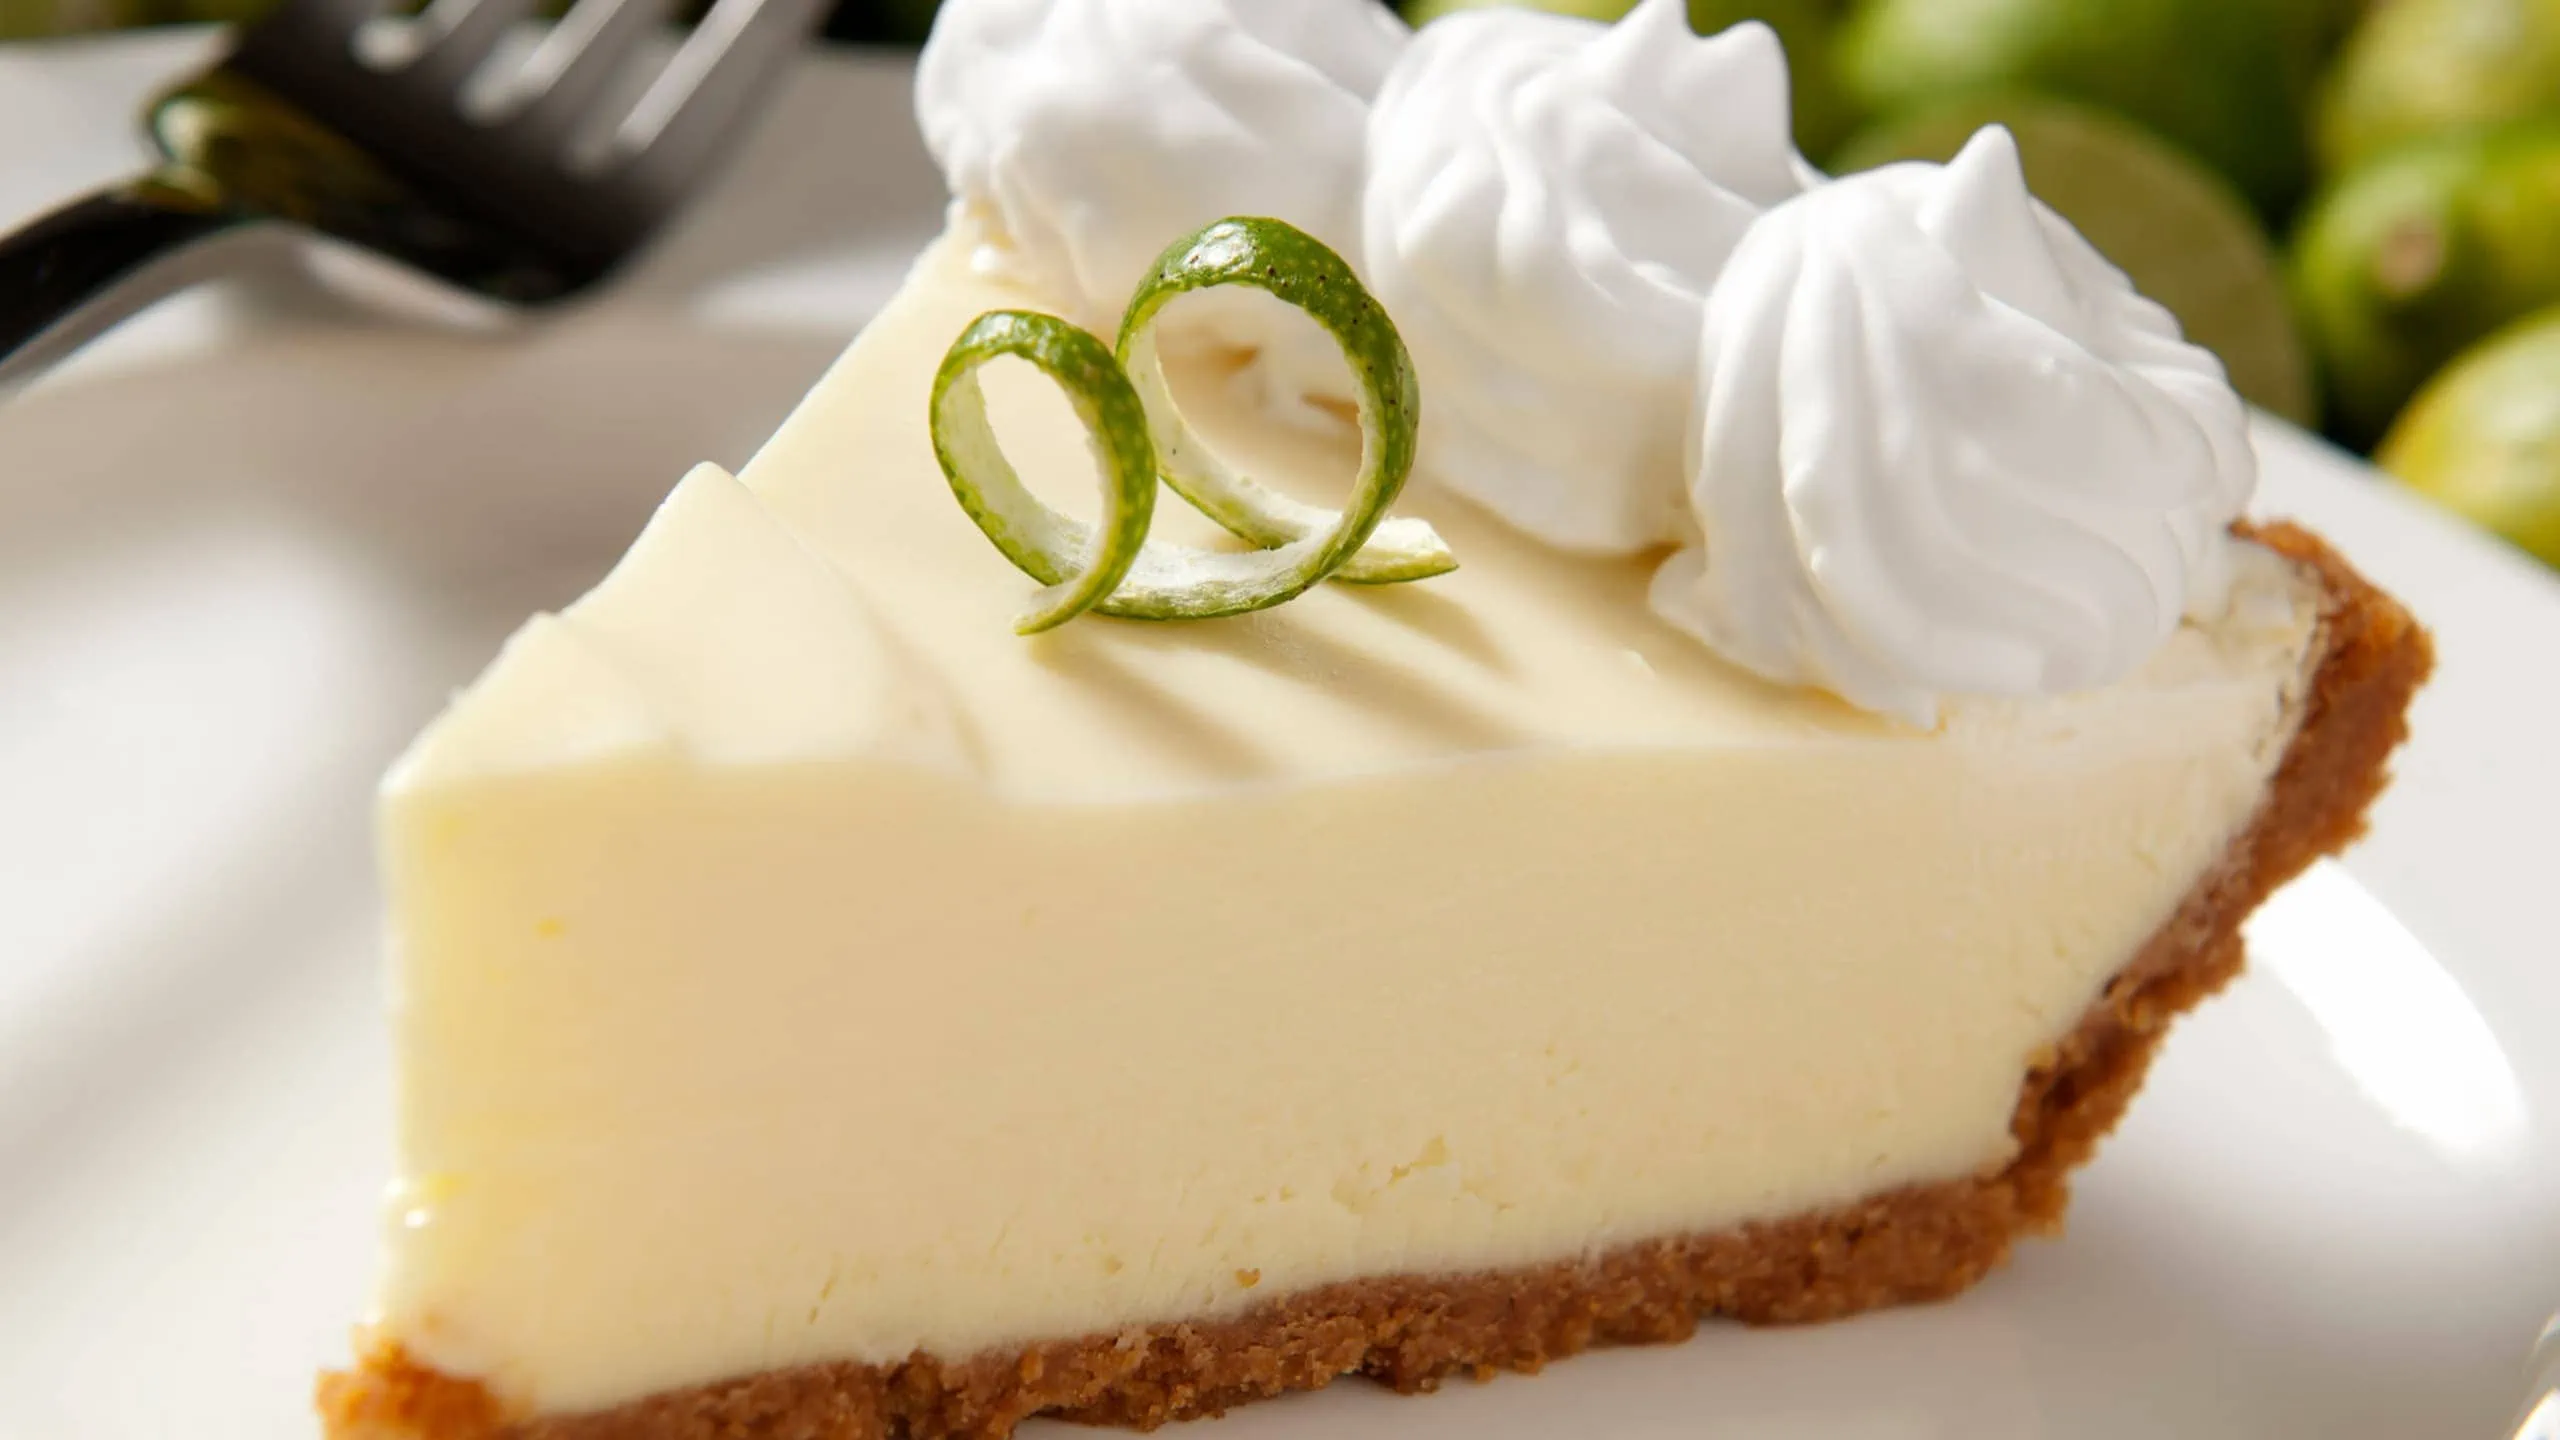 Our Kermit's key lime pie with whipped cream